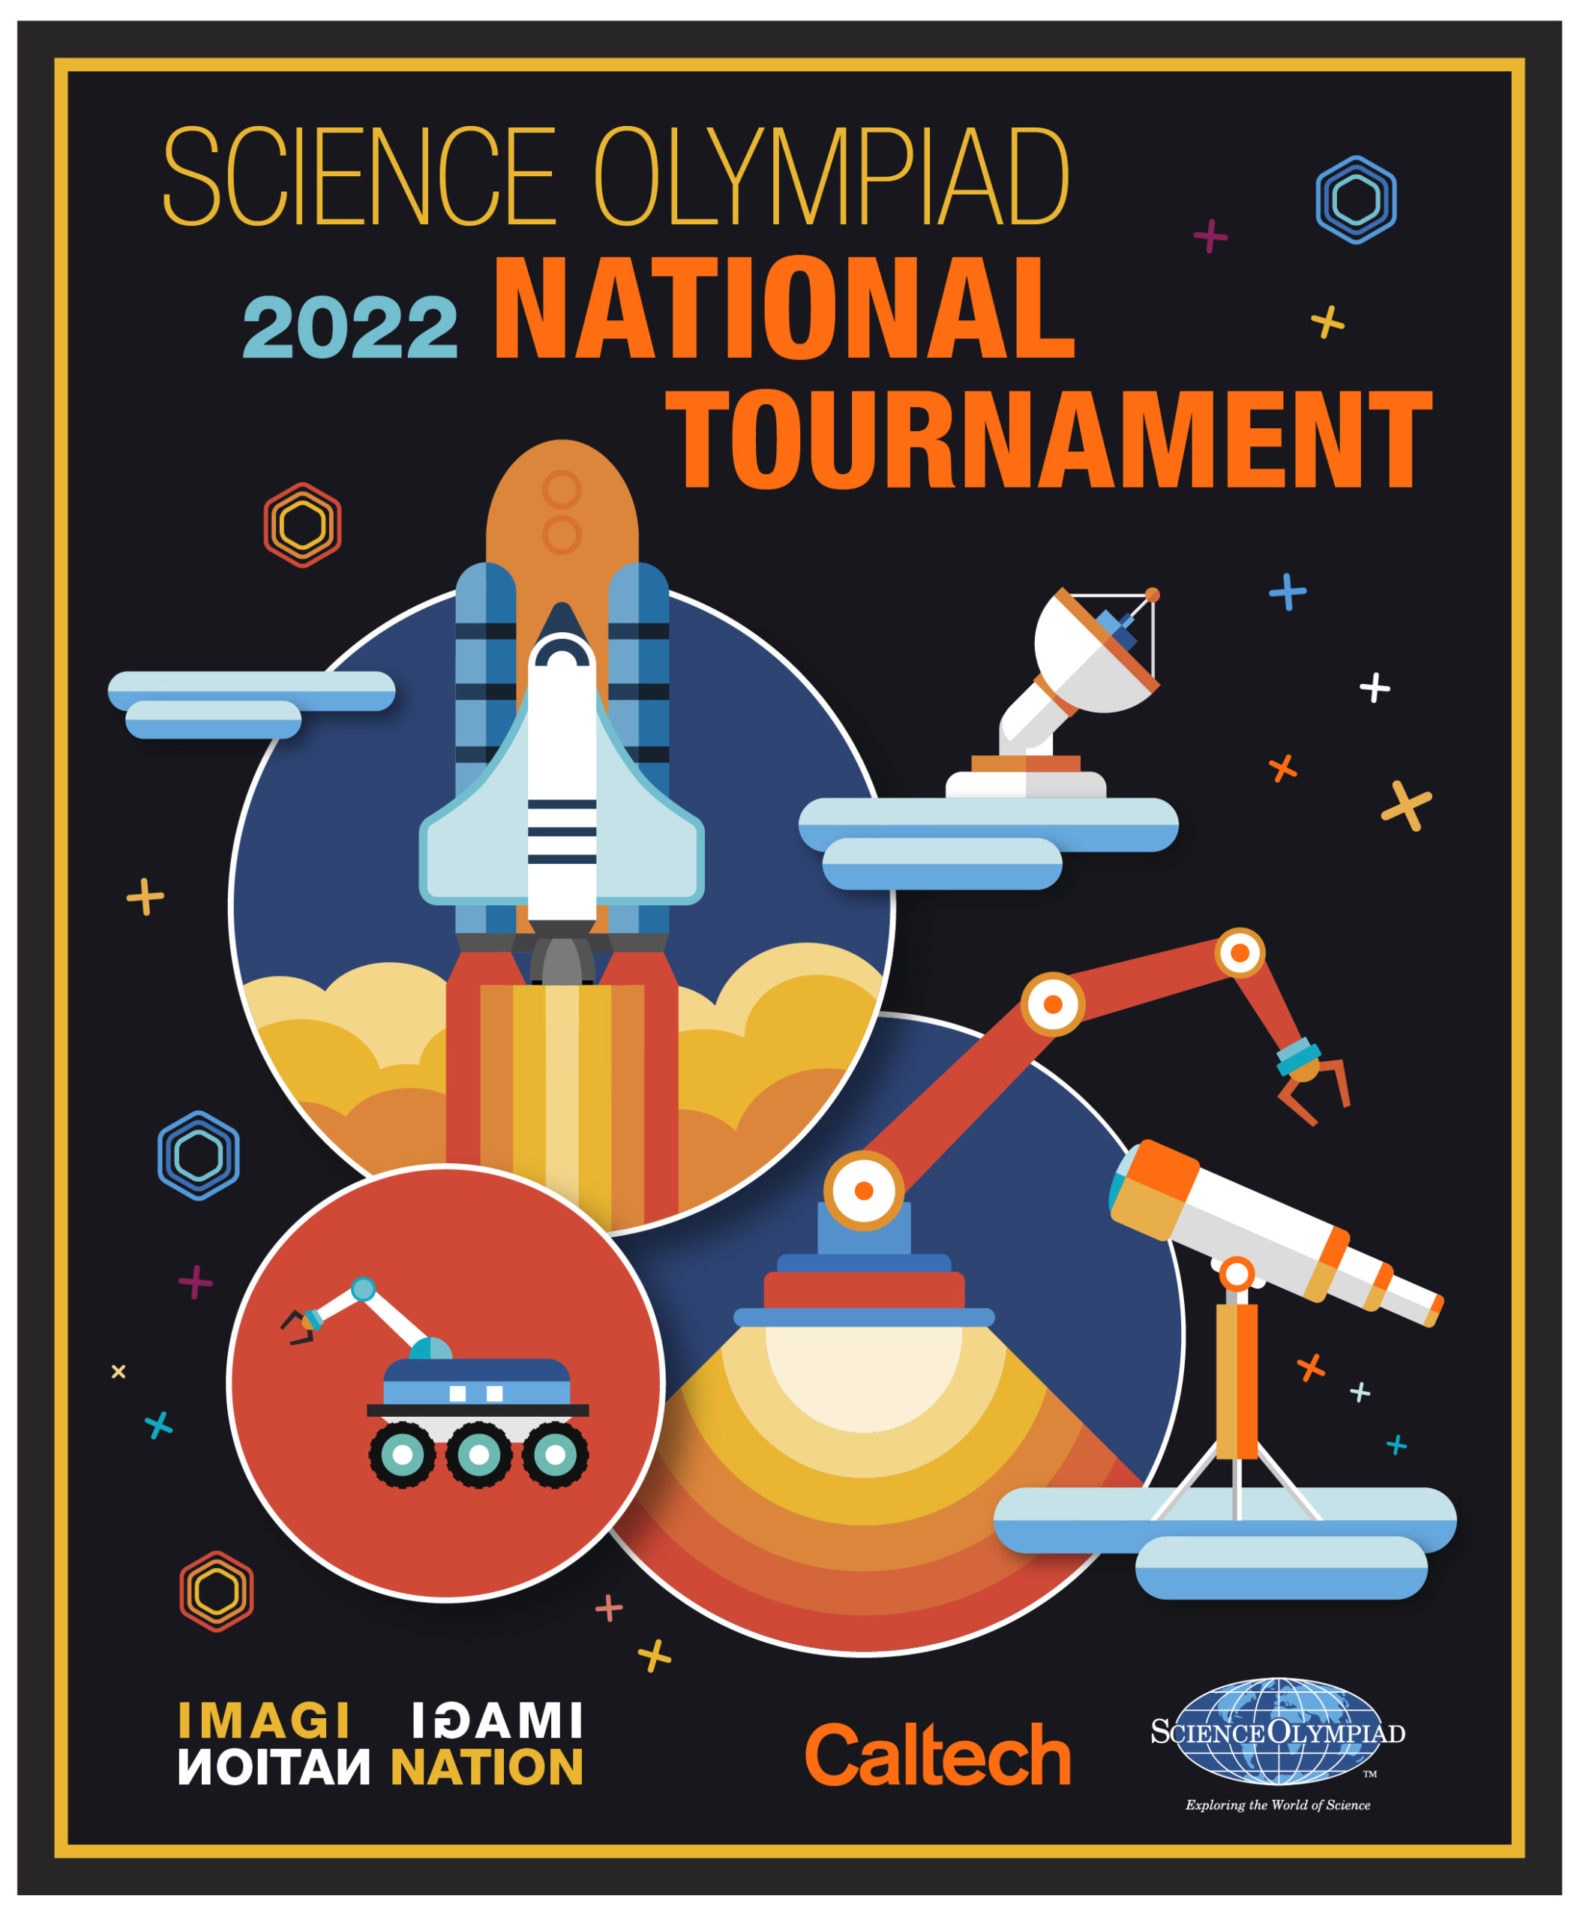 Poster for the 2022 science classroom olympiad national tournament featuring colorful illustrations of a space shuttle, rover, telescope, and robotic arm, with a 